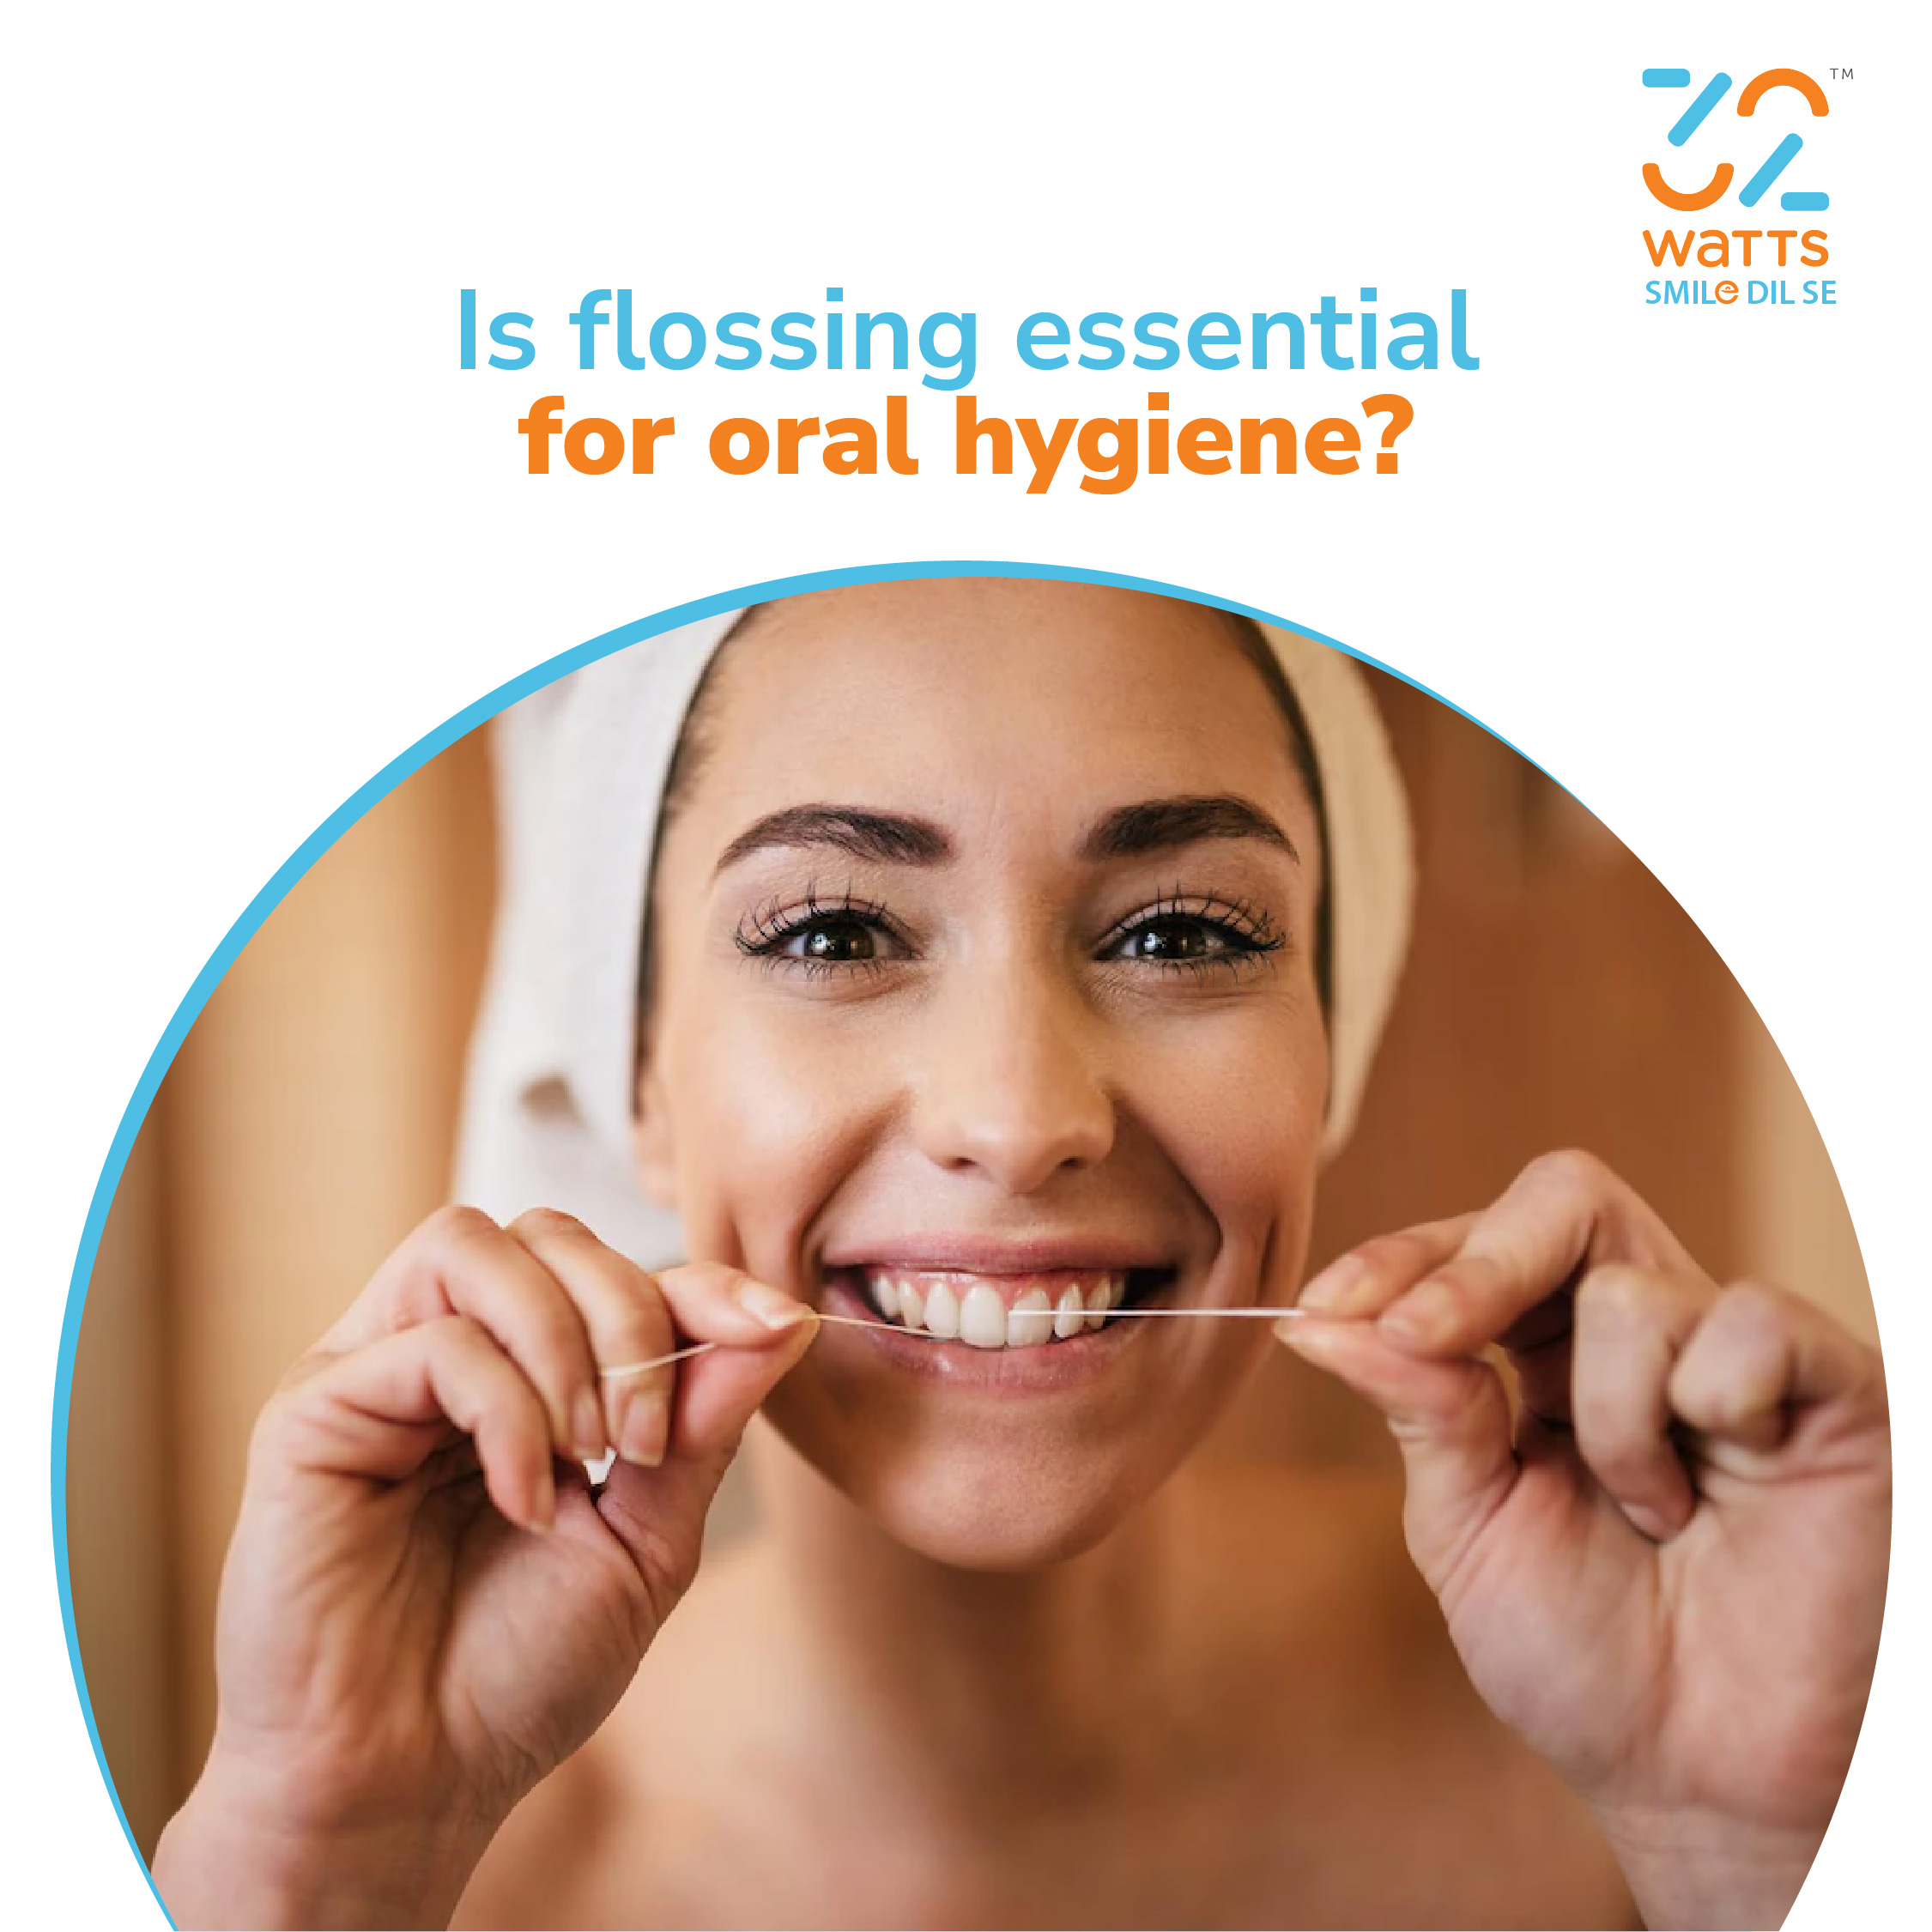 If flossing really important for oral hygiene